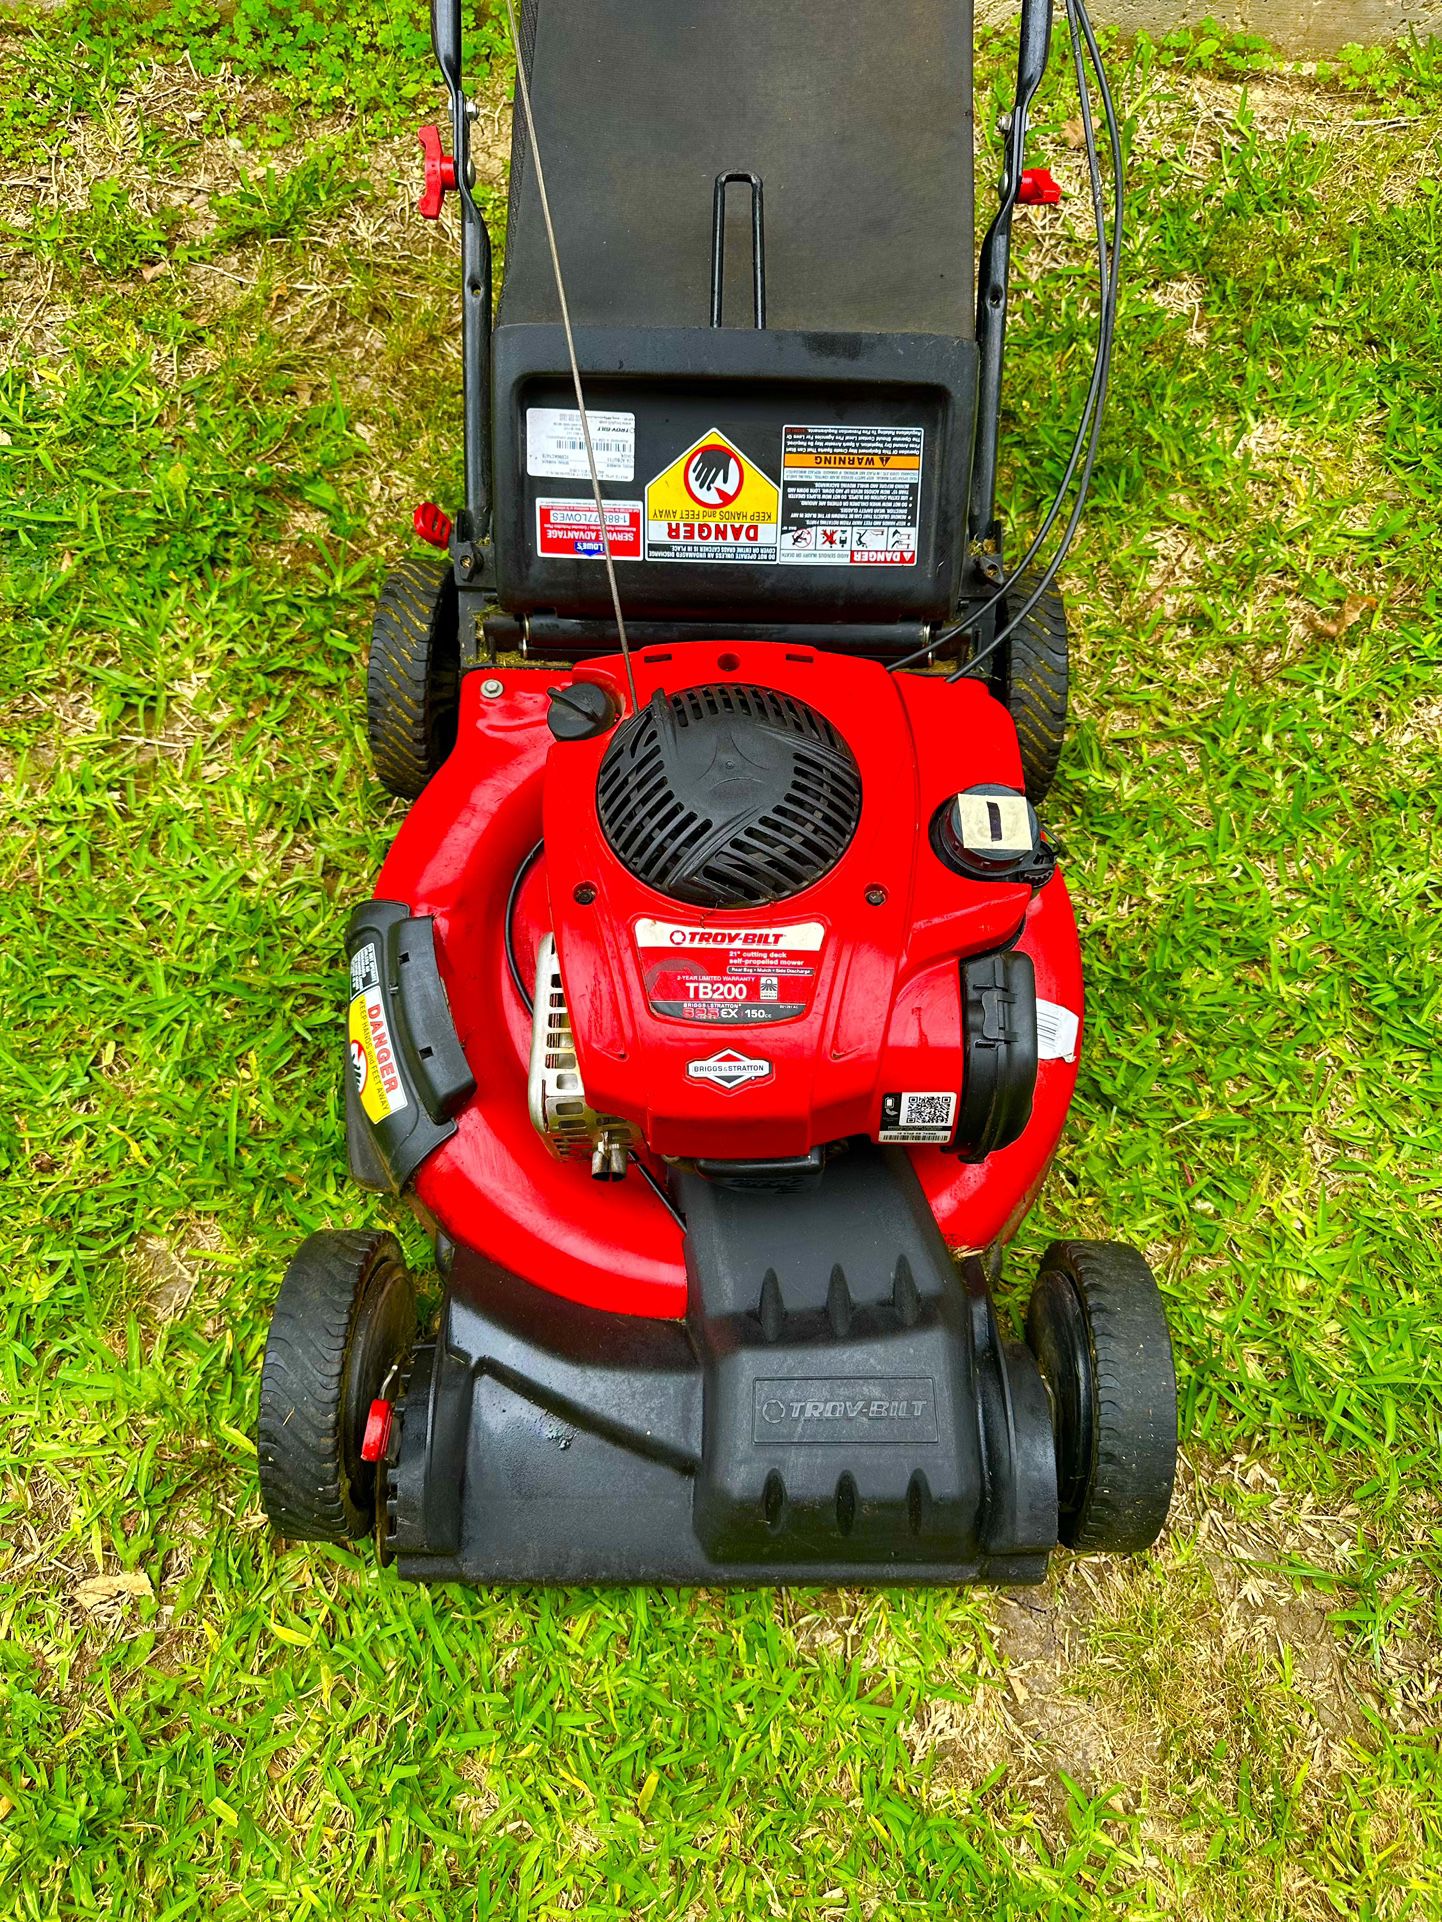 Troy-Bilt Self-propelled Lawn Mower TB200 150-cc 21-in Gas with Briggs and Stratton Engine #50